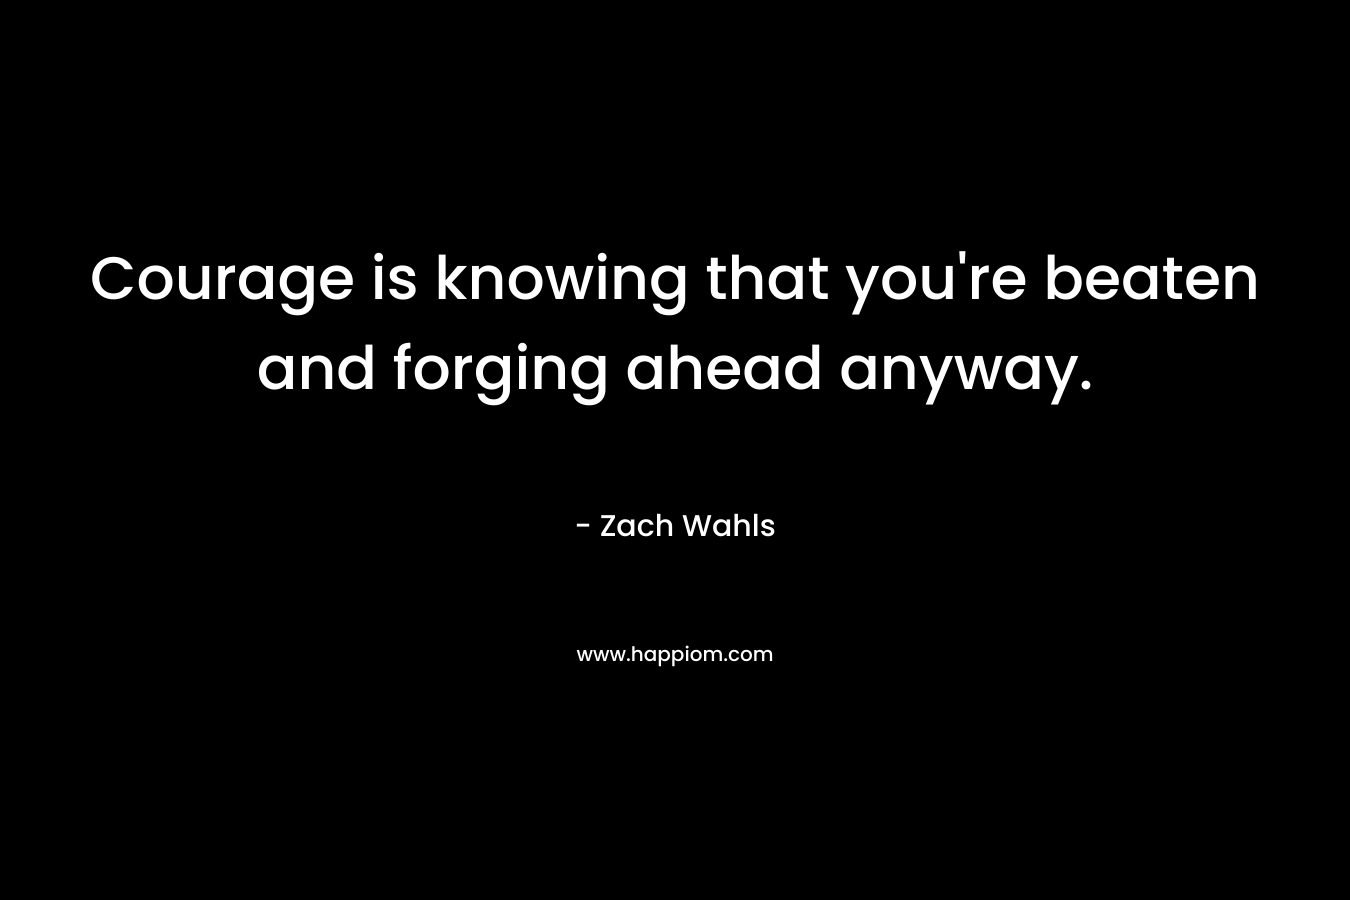 Courage is knowing that you're beaten and forging ahead anyway.